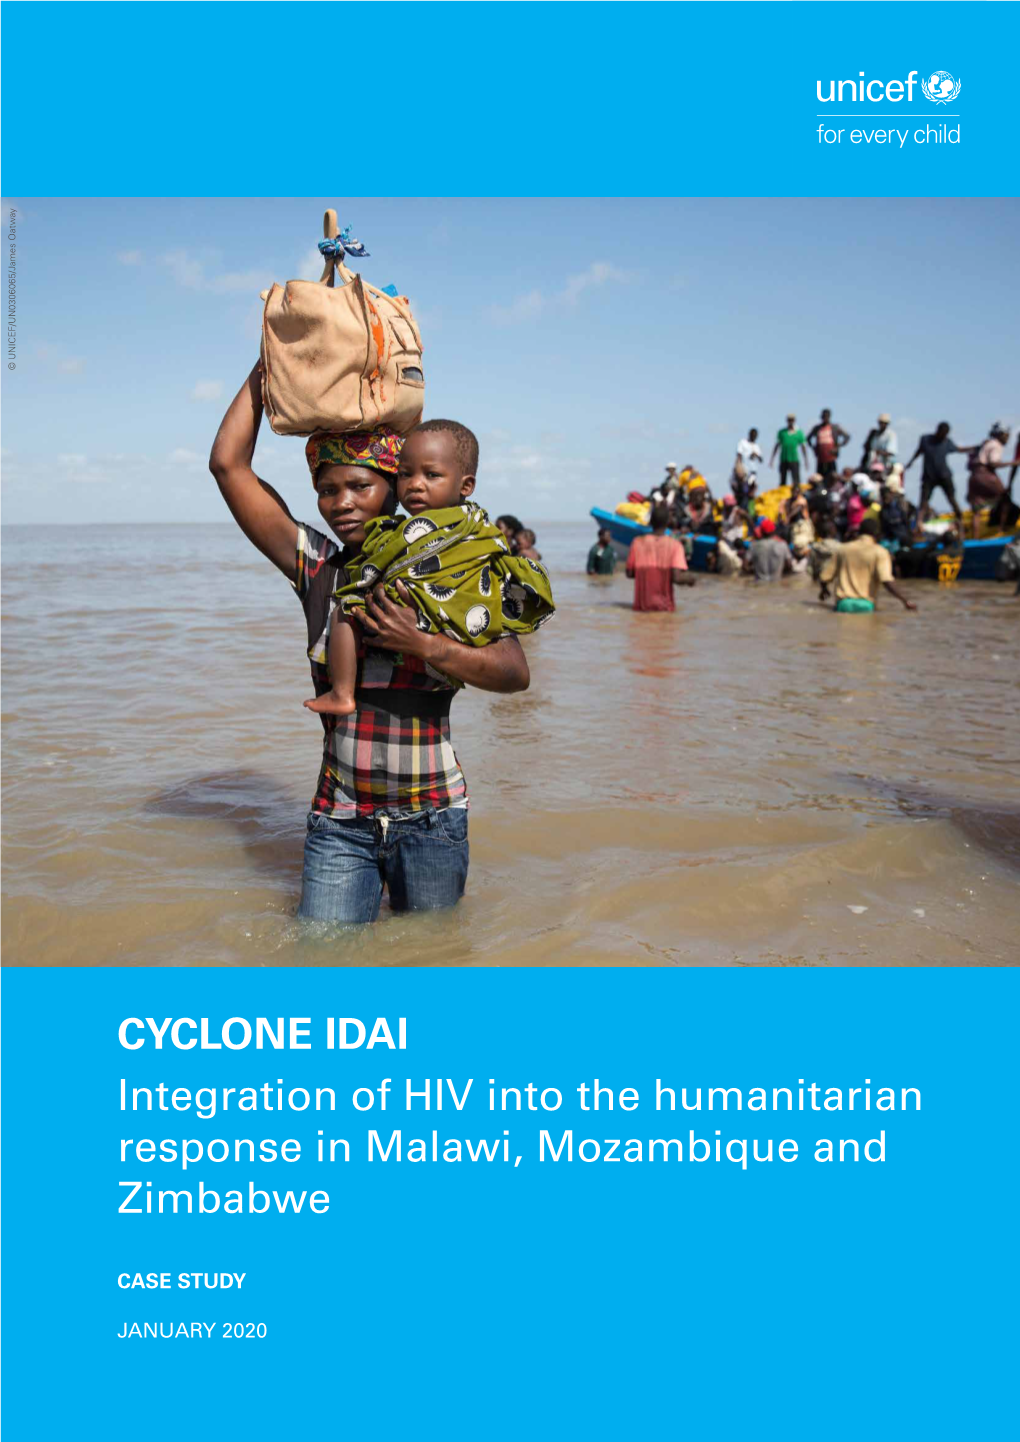 Integration of HIV Into Cyclone Idai Response in Malawi, Mozambique